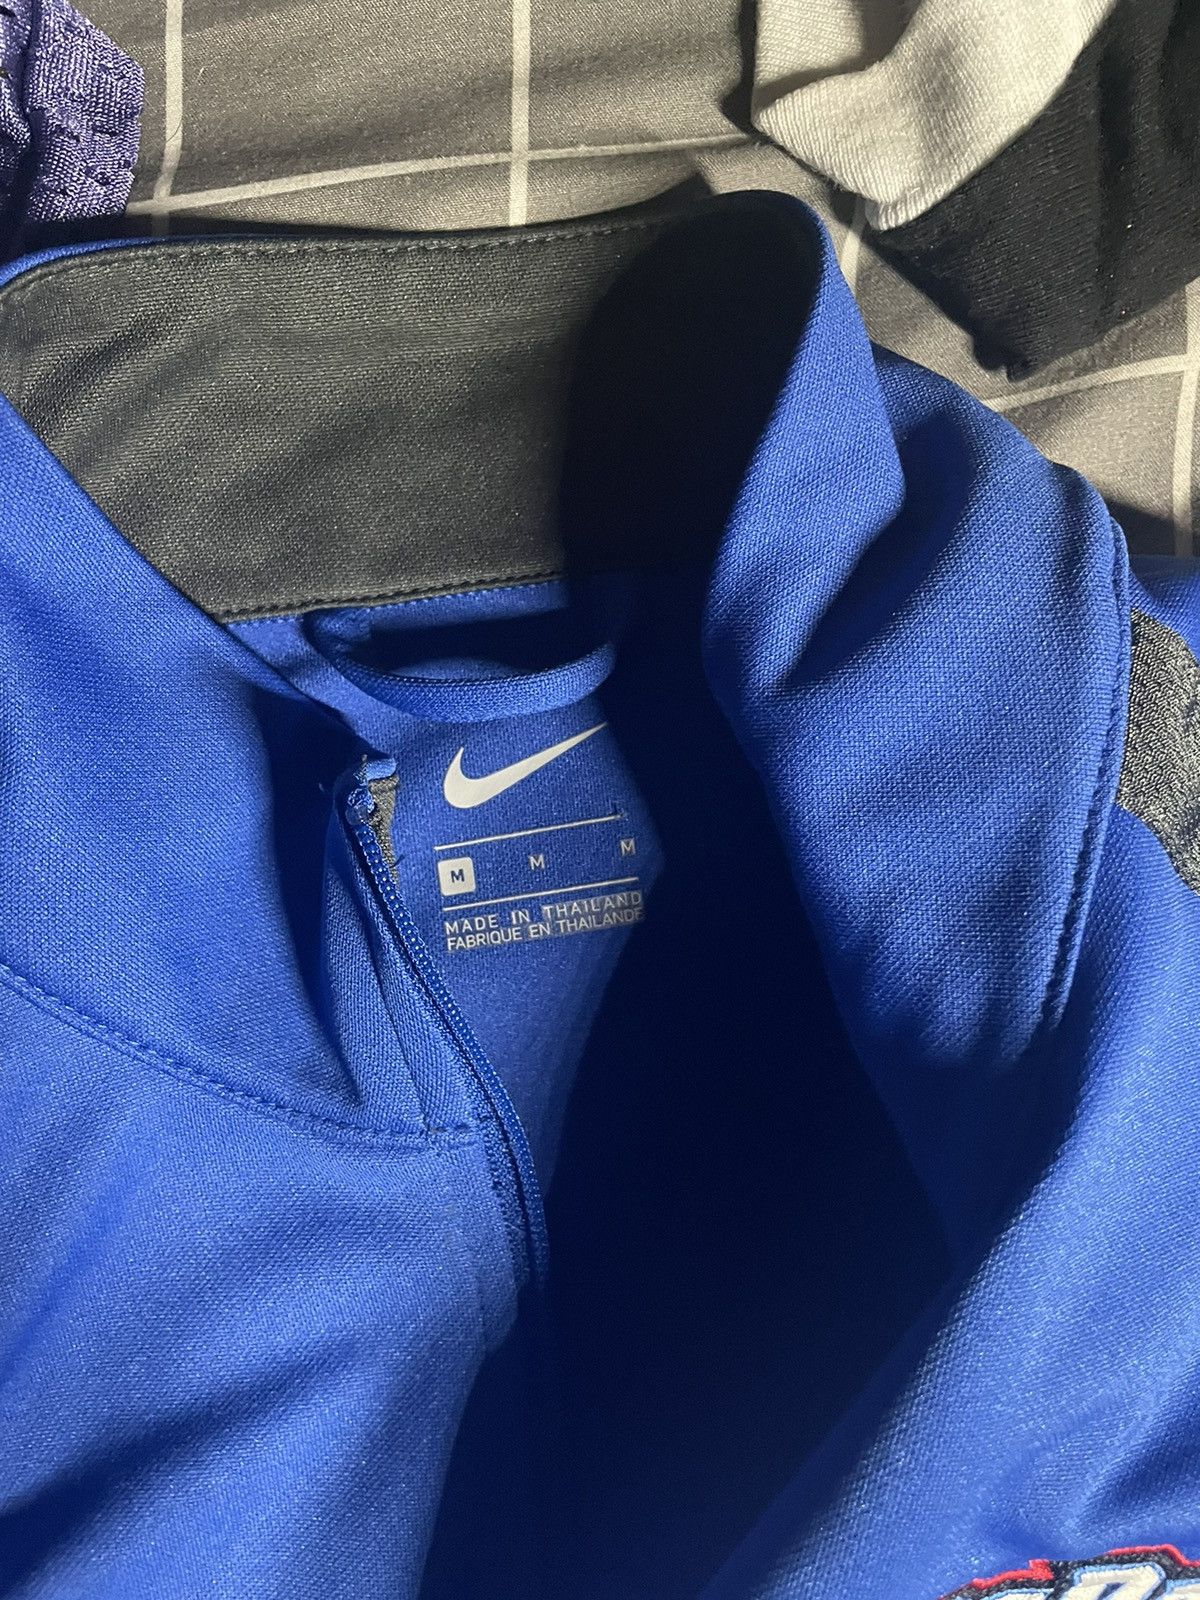 Nike depaul warm up Size US S / EU 44-46 / 1 - 6 Preview